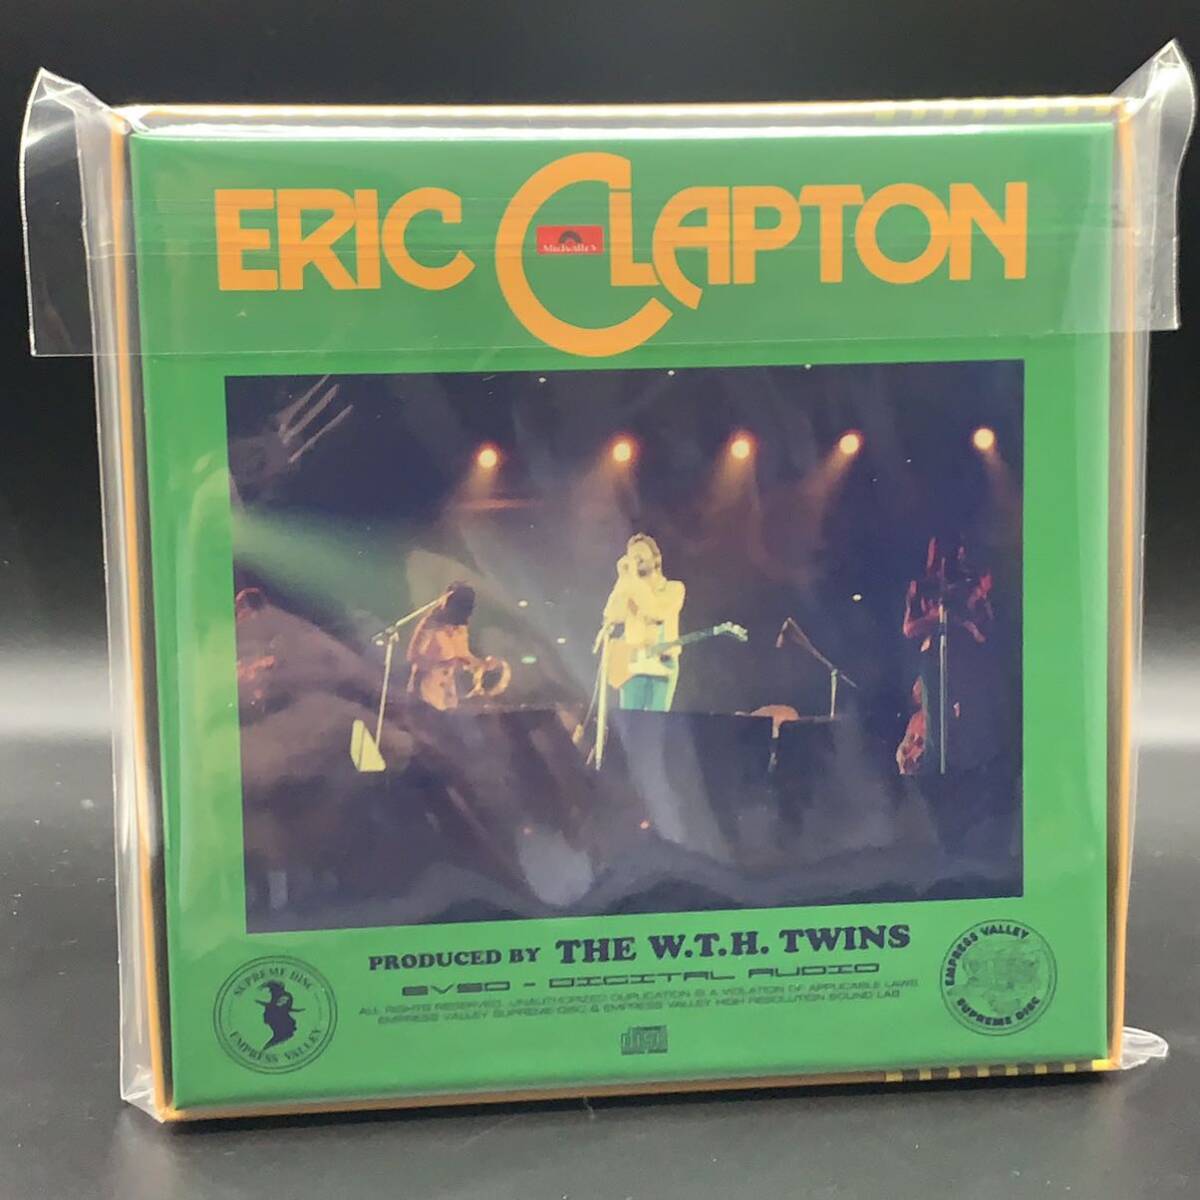 ERIC CLAPTON / TROPICAL SOUND SHOWER「亜熱帯武道館」(6CD BOX with Booklet) 初来日武道館3公演を全て初登場音源で収録！完売品！の画像2